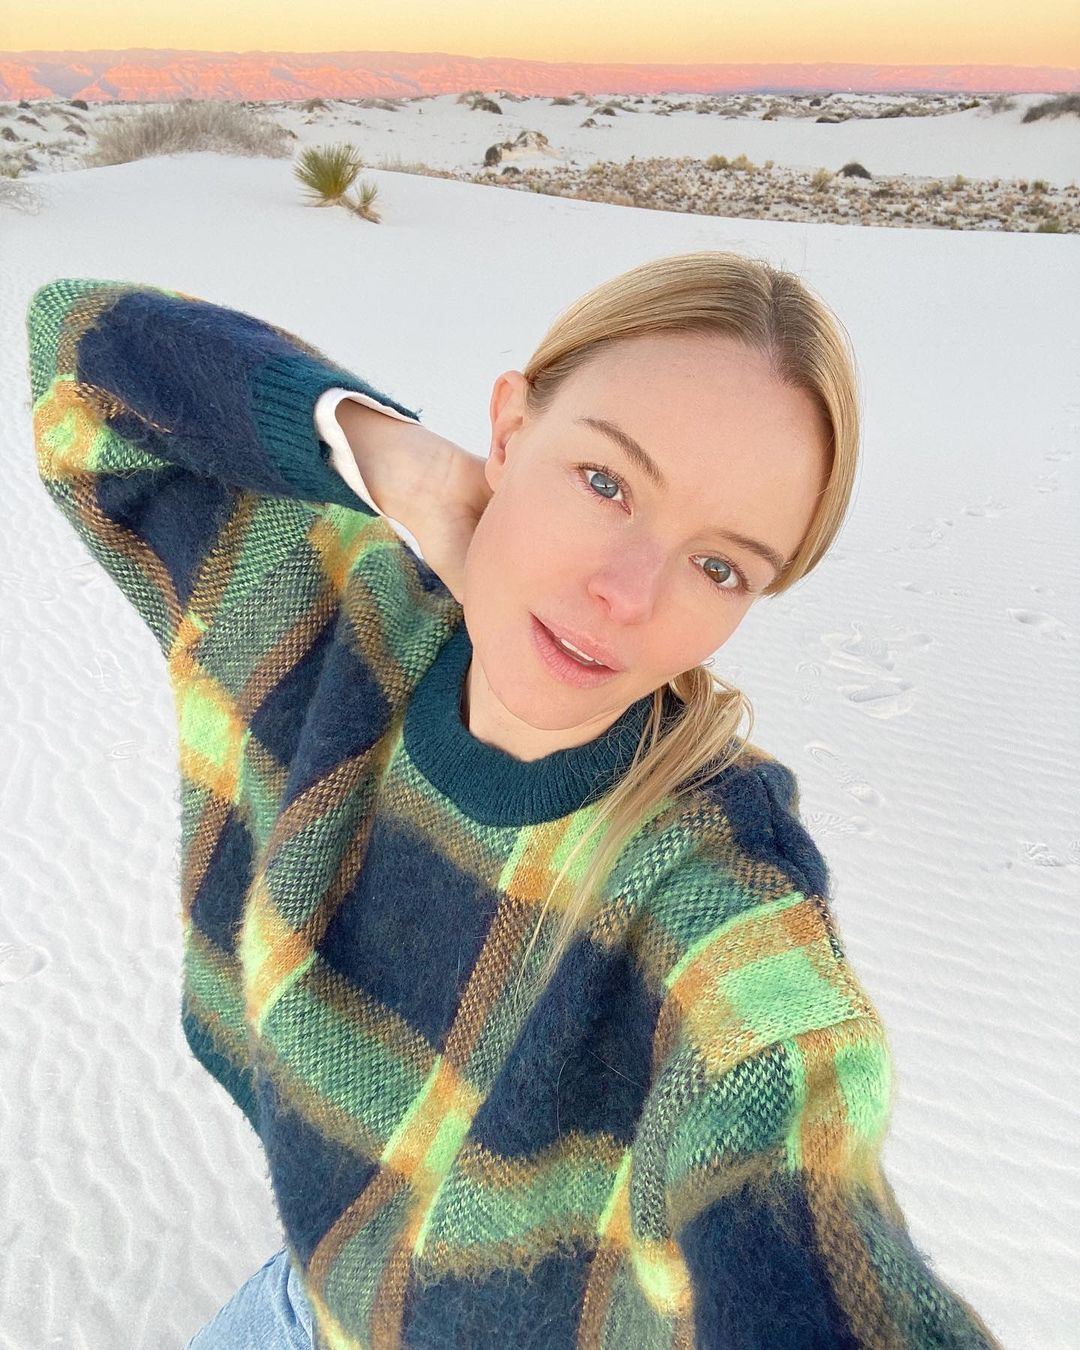 Kate Bosworth wore a plaid sweater from Mango and it's on sale